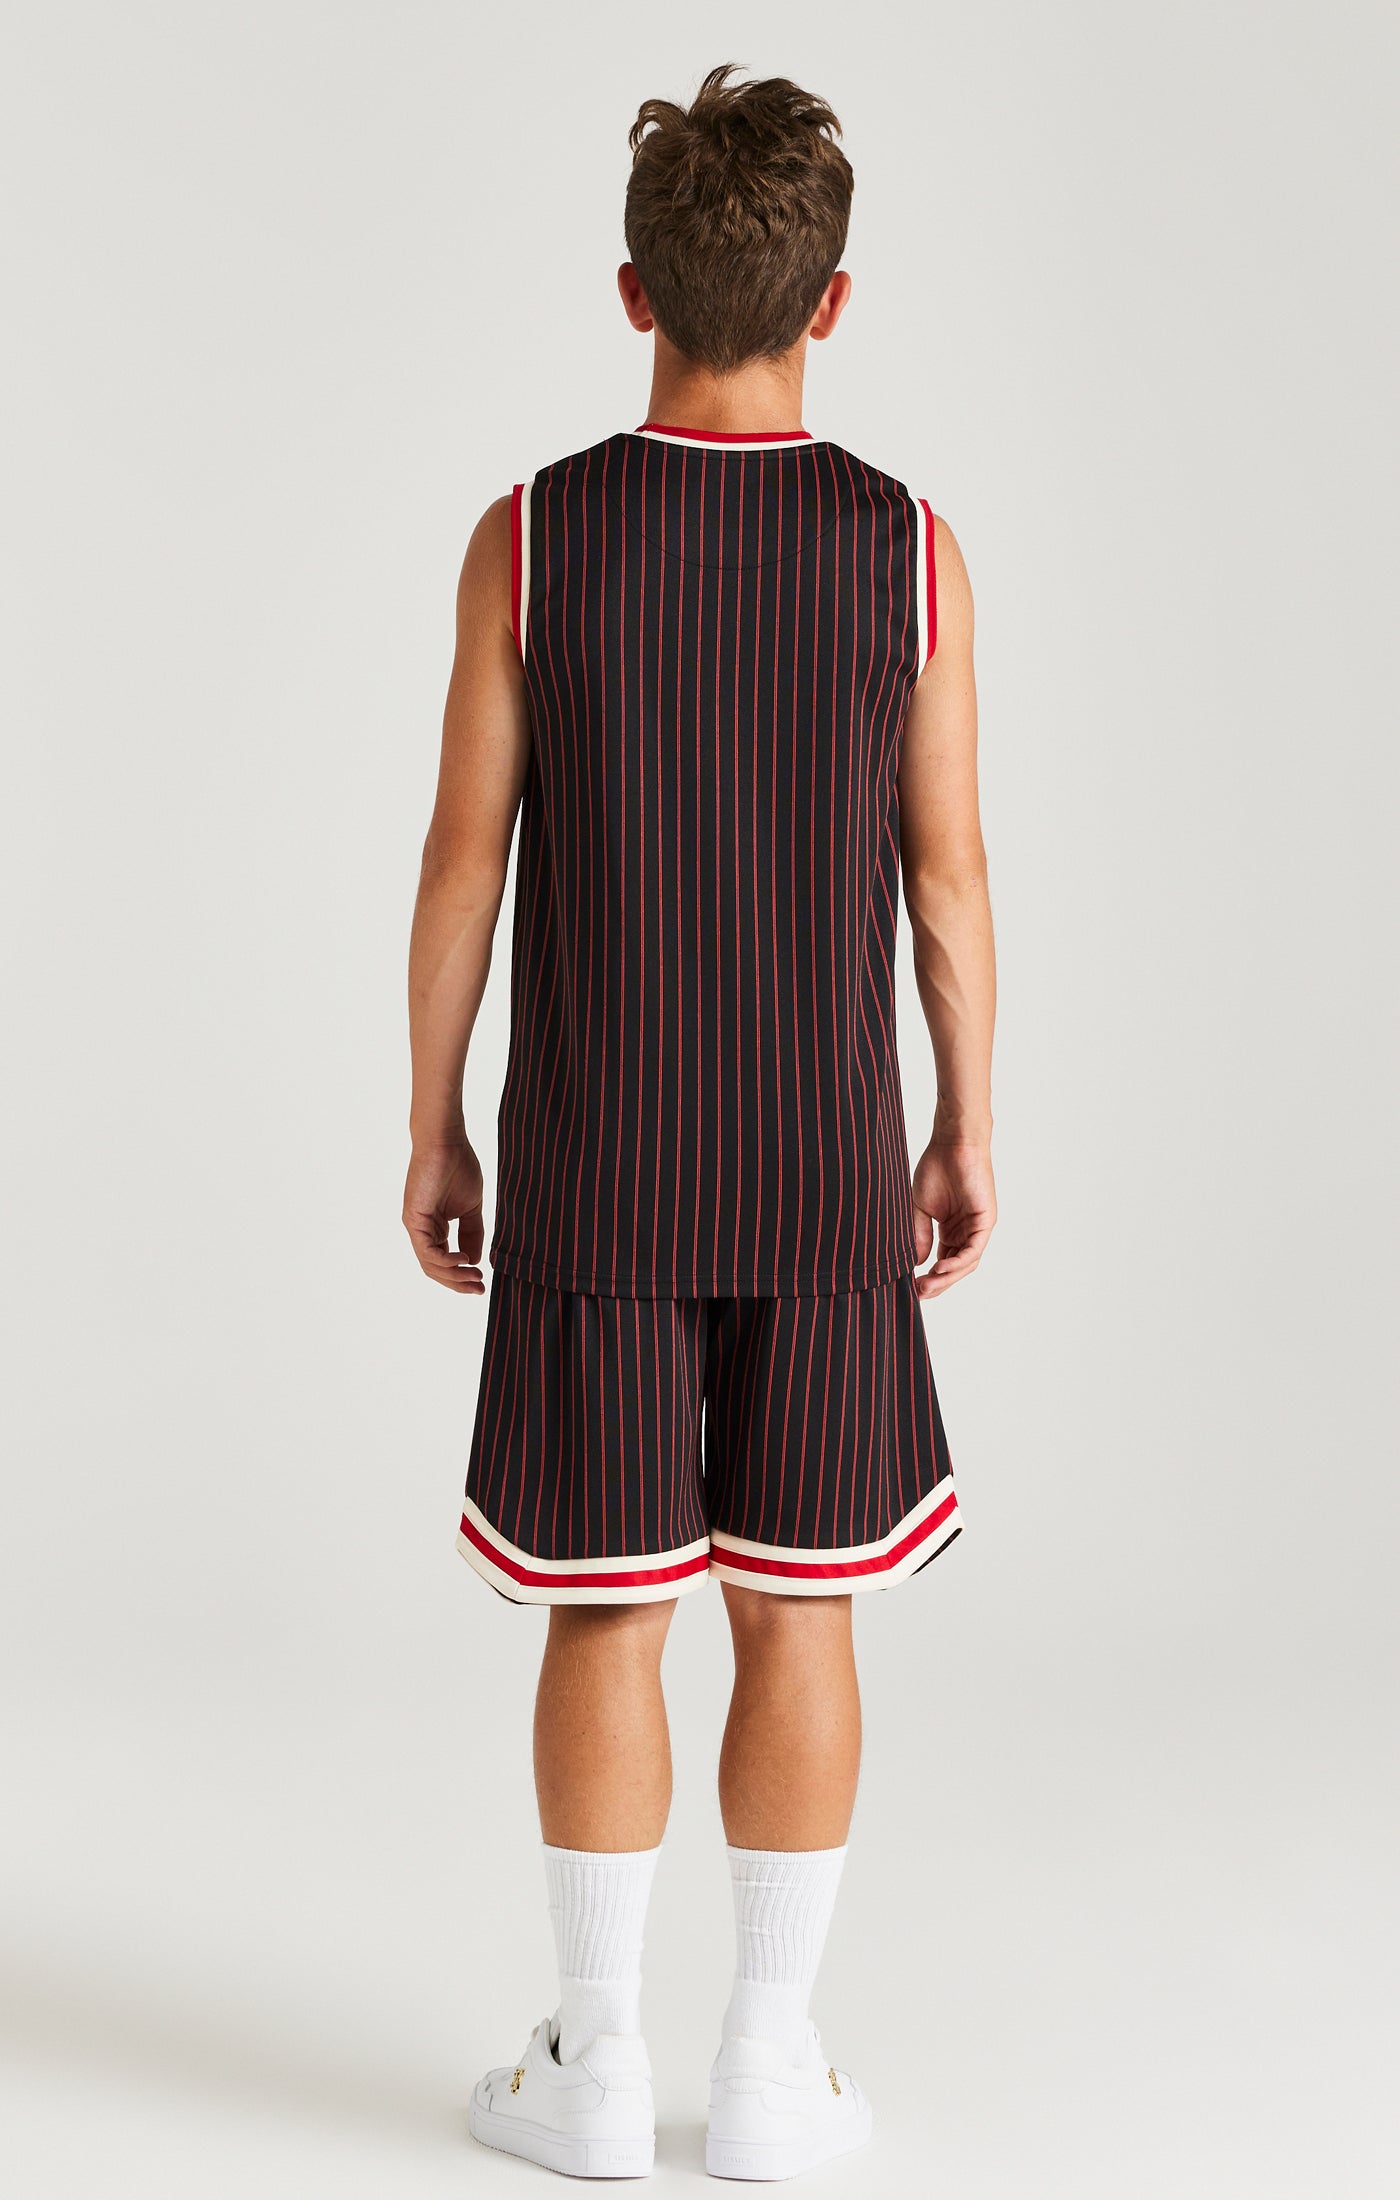 Load image into Gallery viewer, SikSilk Retro Classic Basketball Vest - Black (4)